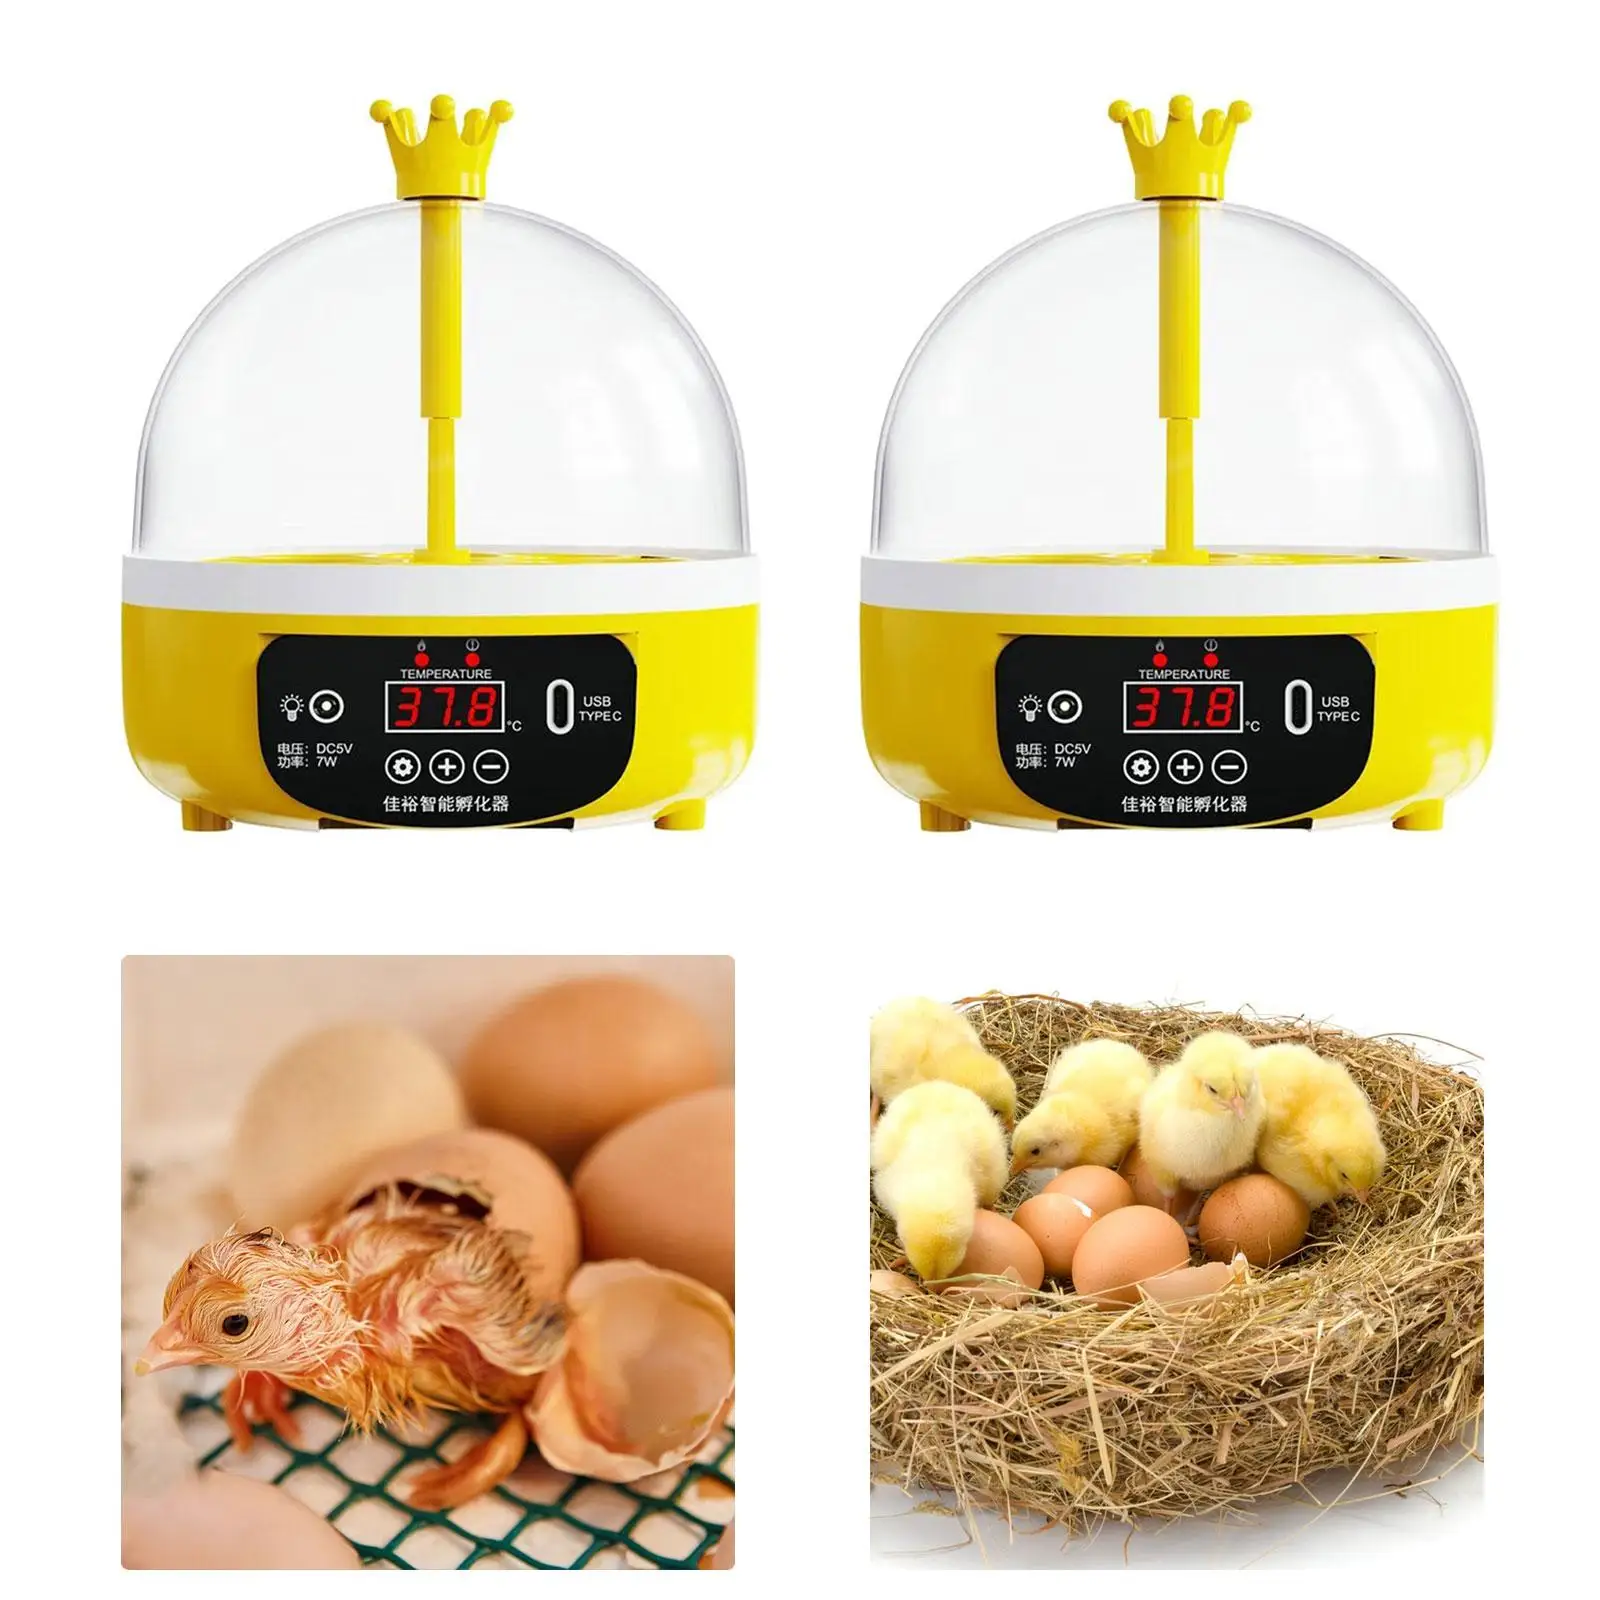 Digital Egg Incubator Poultry Hatcher Hatching Small Egg Turner Tray Household Chicken Incubator for Pigeon Birds Quail Supplies